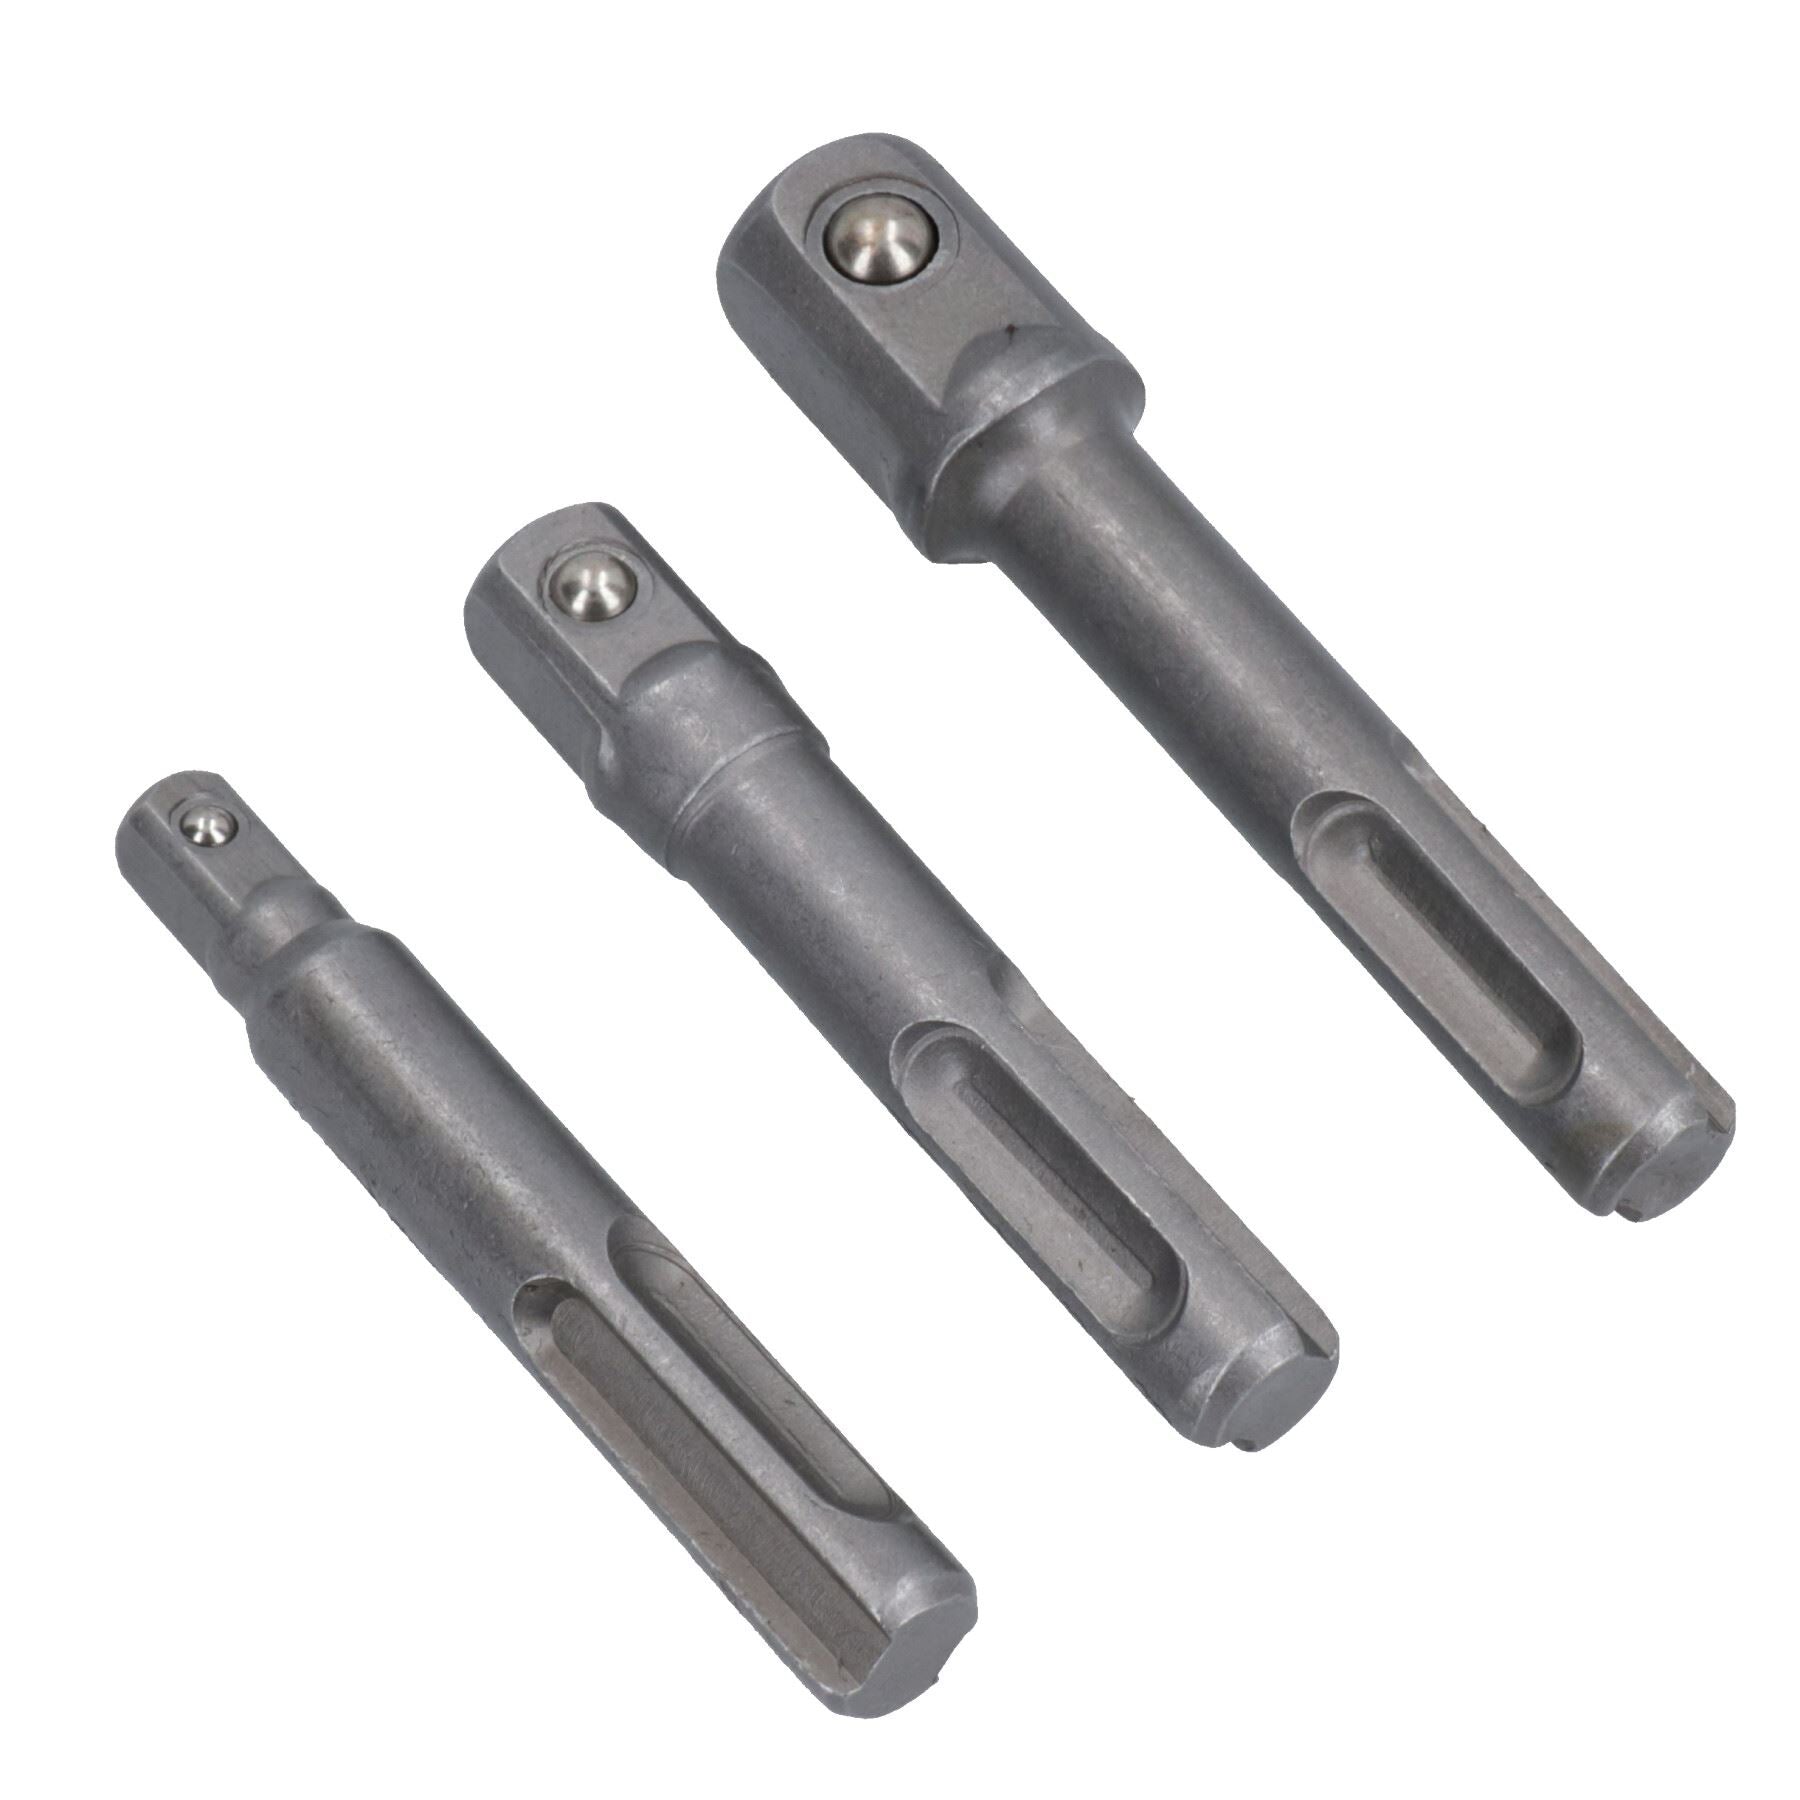 3pc SDS Socket Driver Set 1/4" / 3/8" and 1/2" Drill Chuck Adaptor Adapter TE461